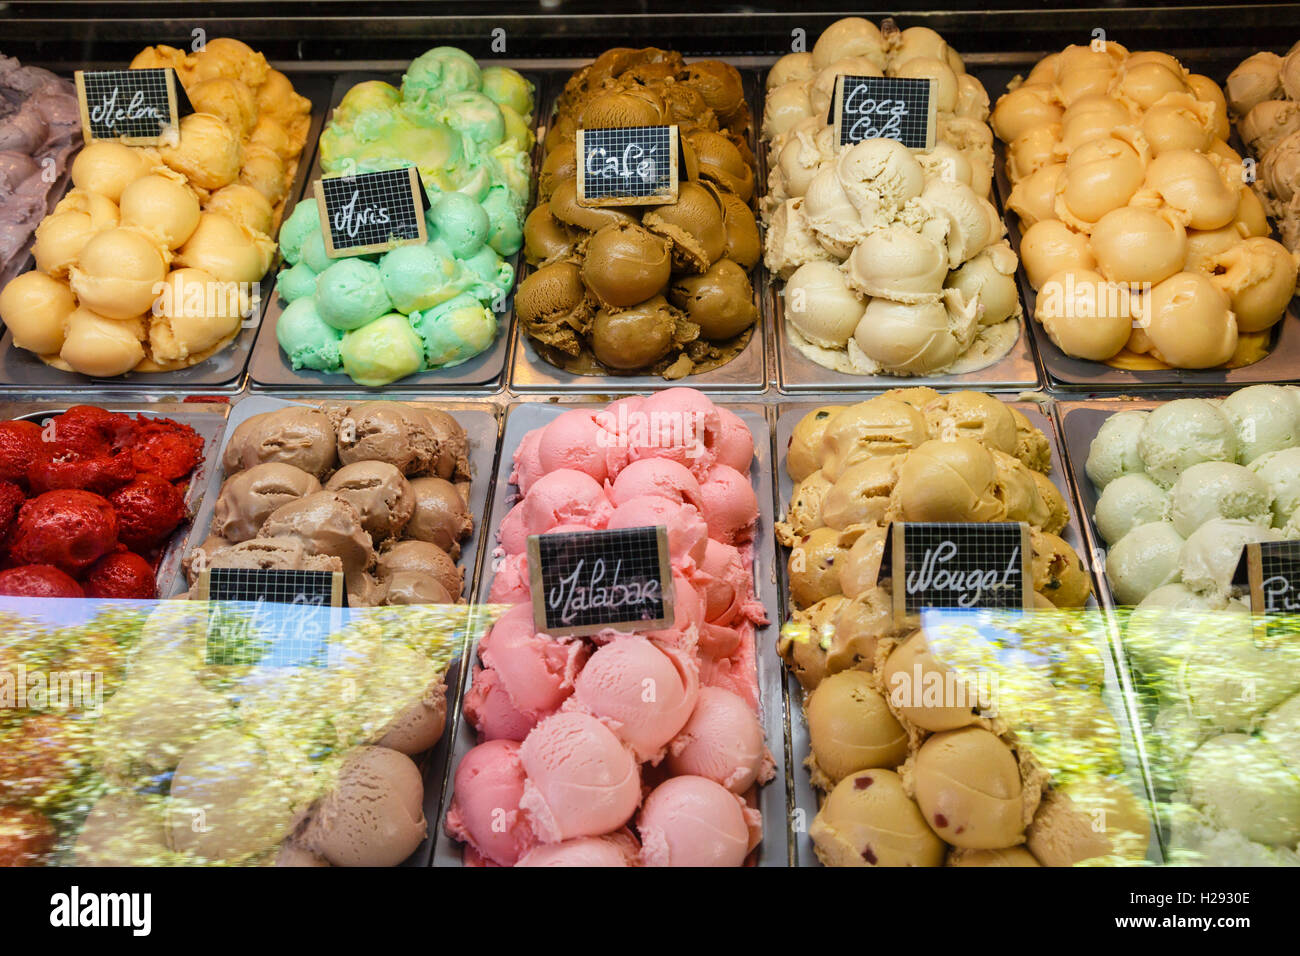 Many flavours of ice cream on sale at Vallon-Pont-d'Arc, Ardèche, France Stock Photo